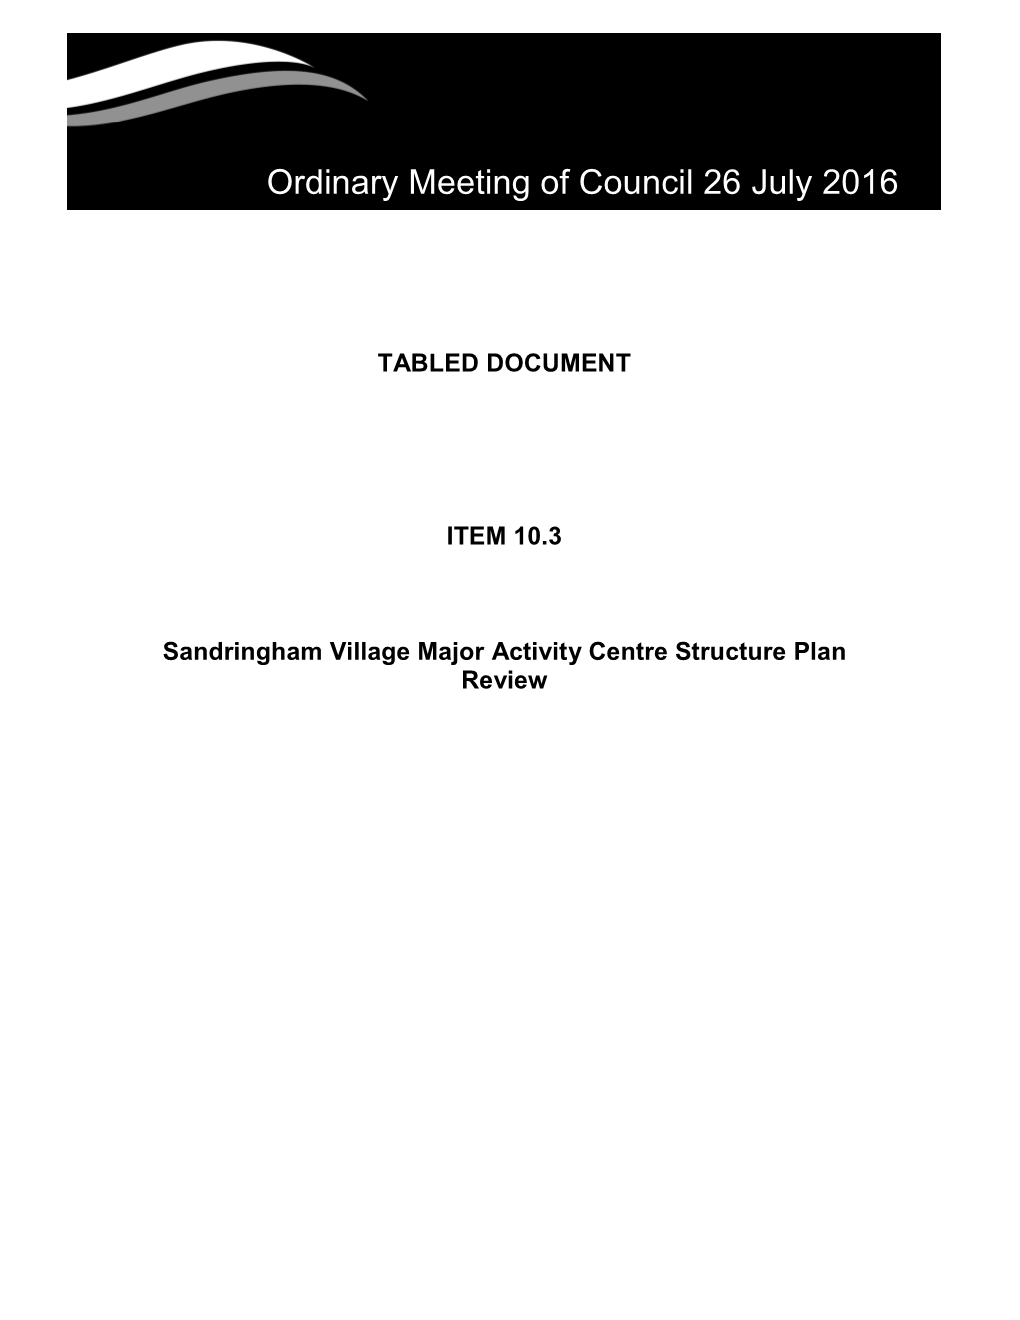 Tabled Document for July 2016